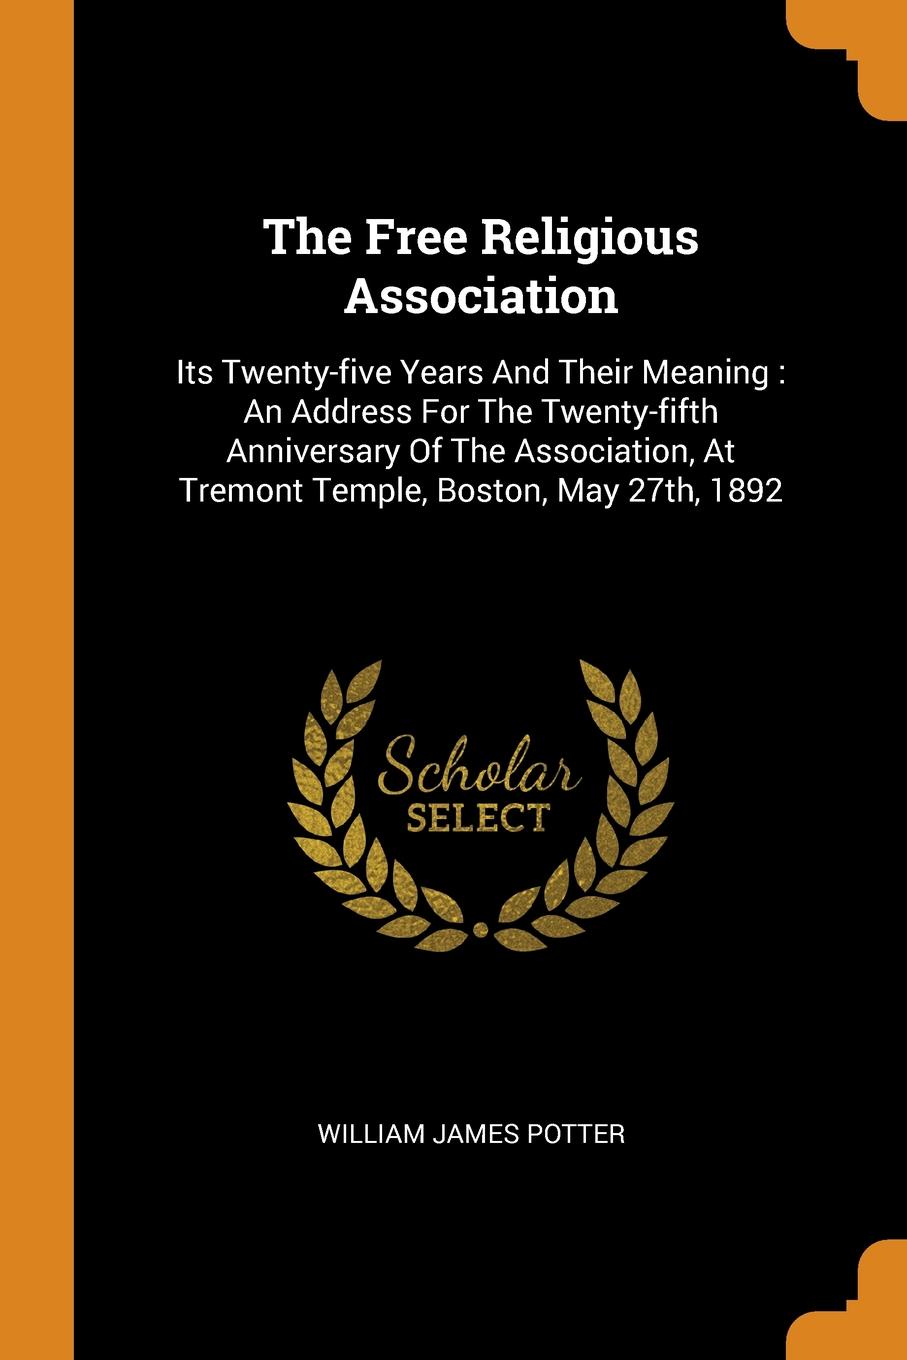 The Free Religious Association. Its Twenty-five Years And Their Meaning : An Address For The Twenty-fifth Anniversary Of The Association, At Tremont Temple, Boston, May 27th, 1892